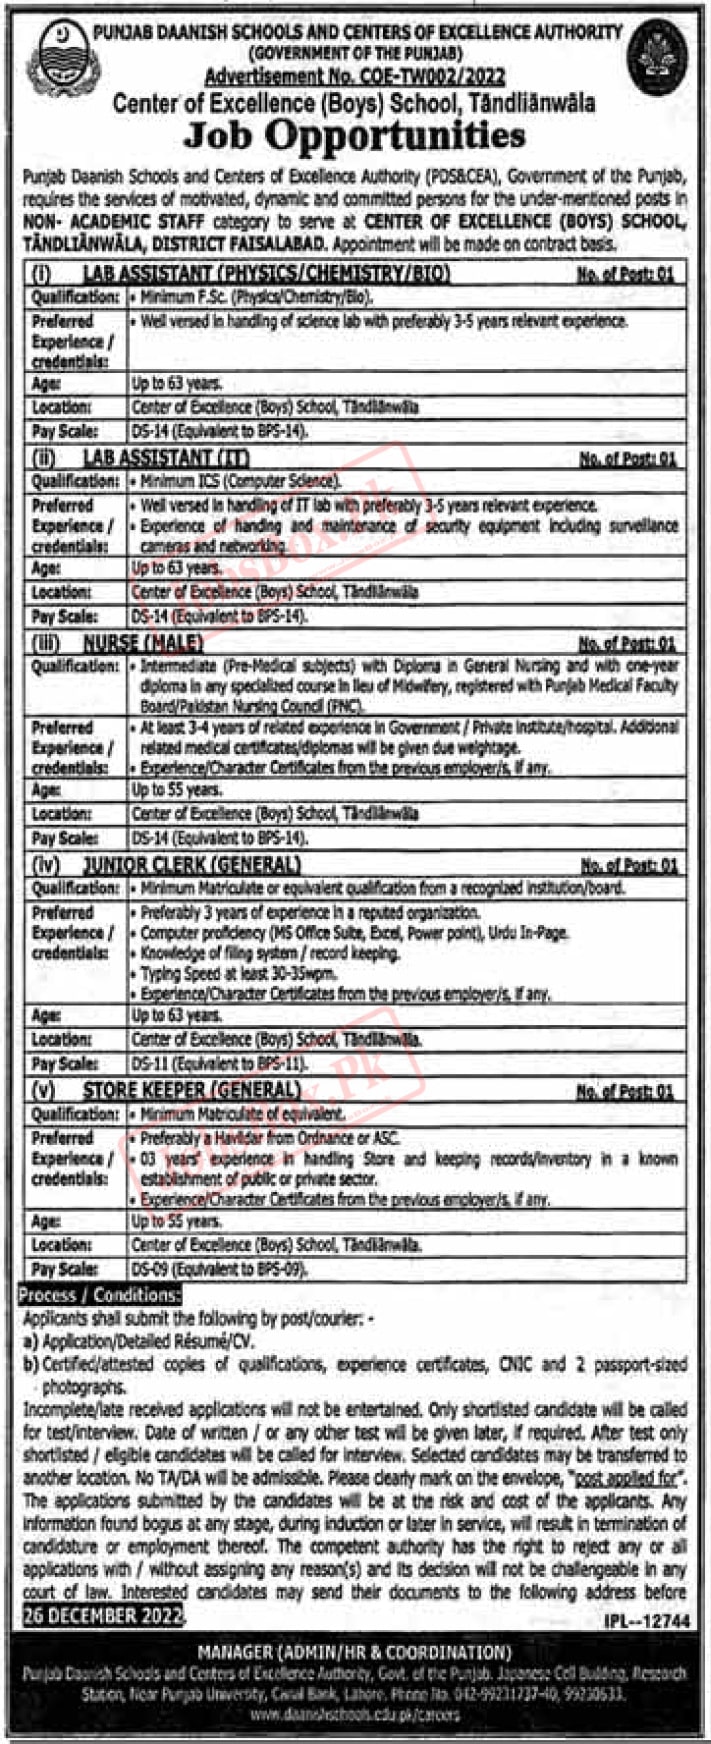 Punjab Daanish Schools & Centers of Excellence Authority Jobs 2022 Latest Advertisement